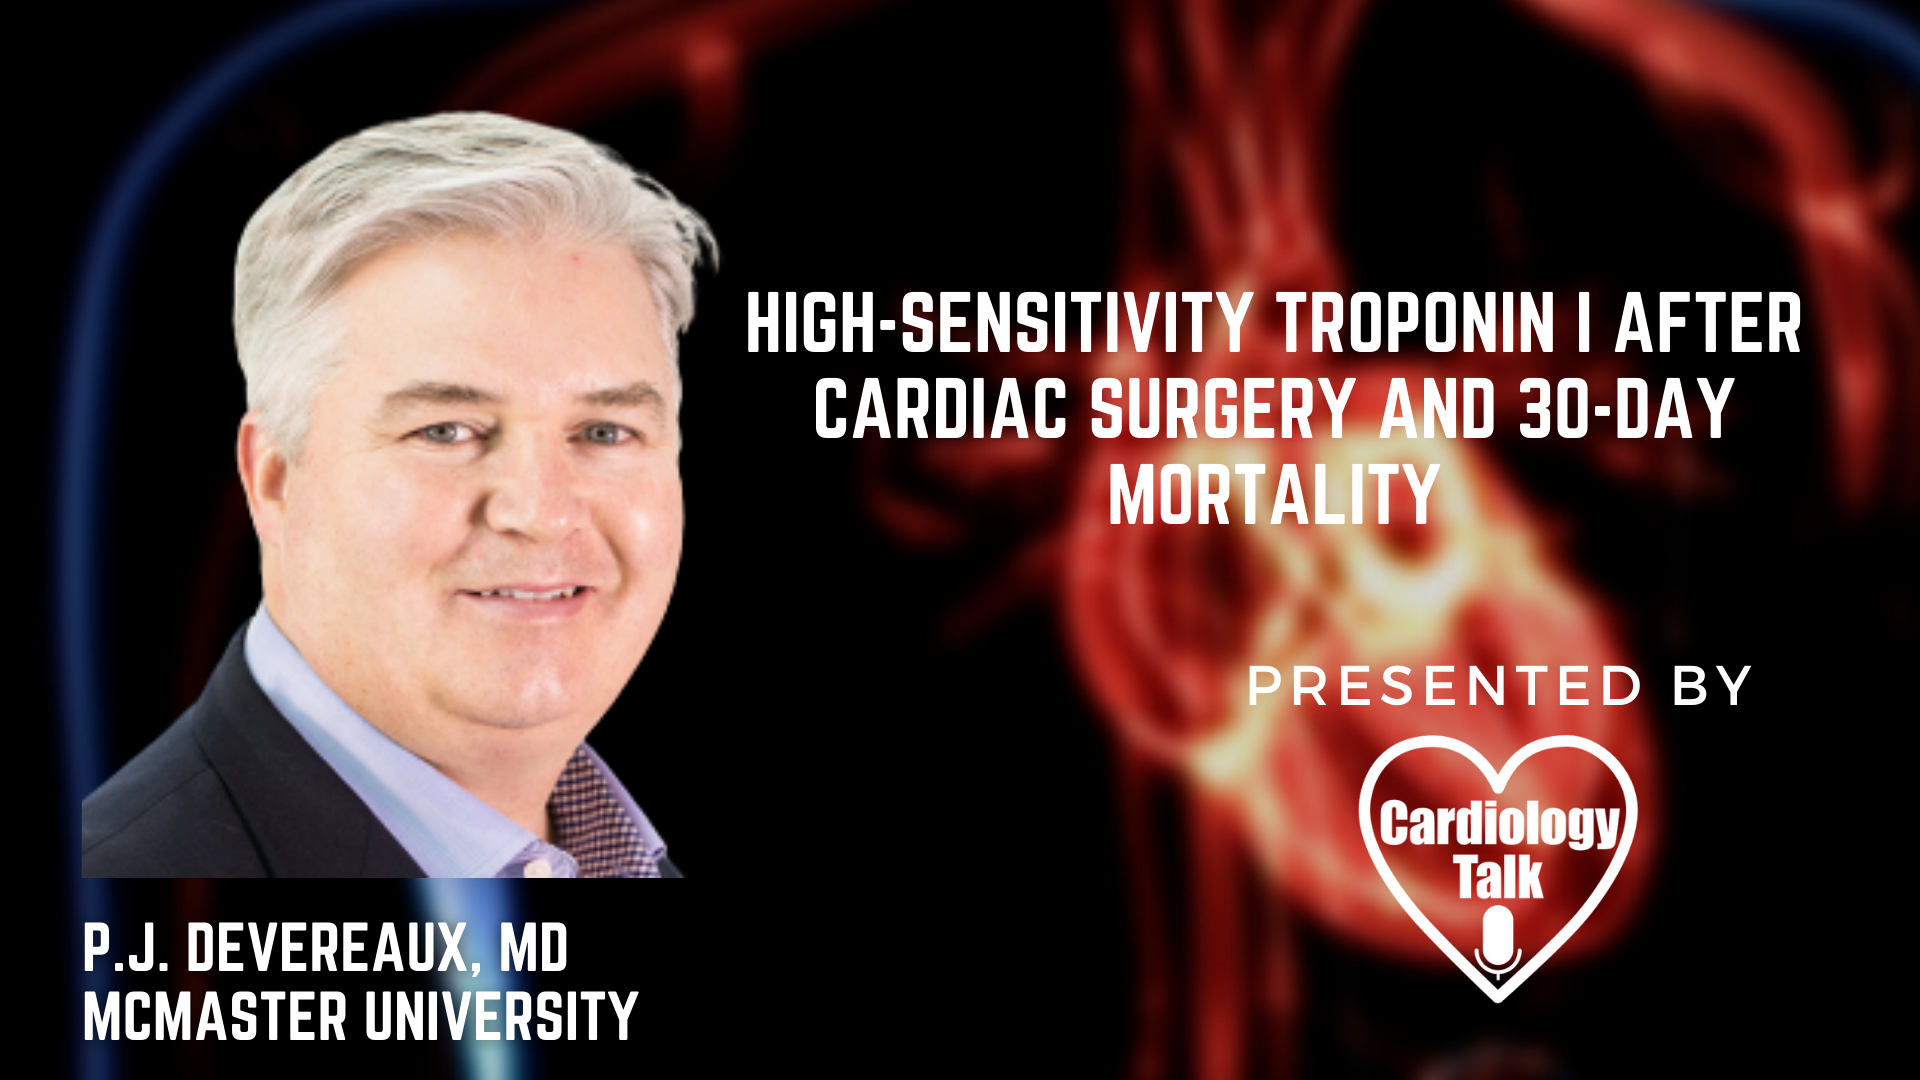 P.J. Devereaux, MD- High-Sensitivity Troponin I after Cardiac Surgery and 30-Day Mortality @PHRIresearch @MacDeptMed #Troponin #CardiacSurgery